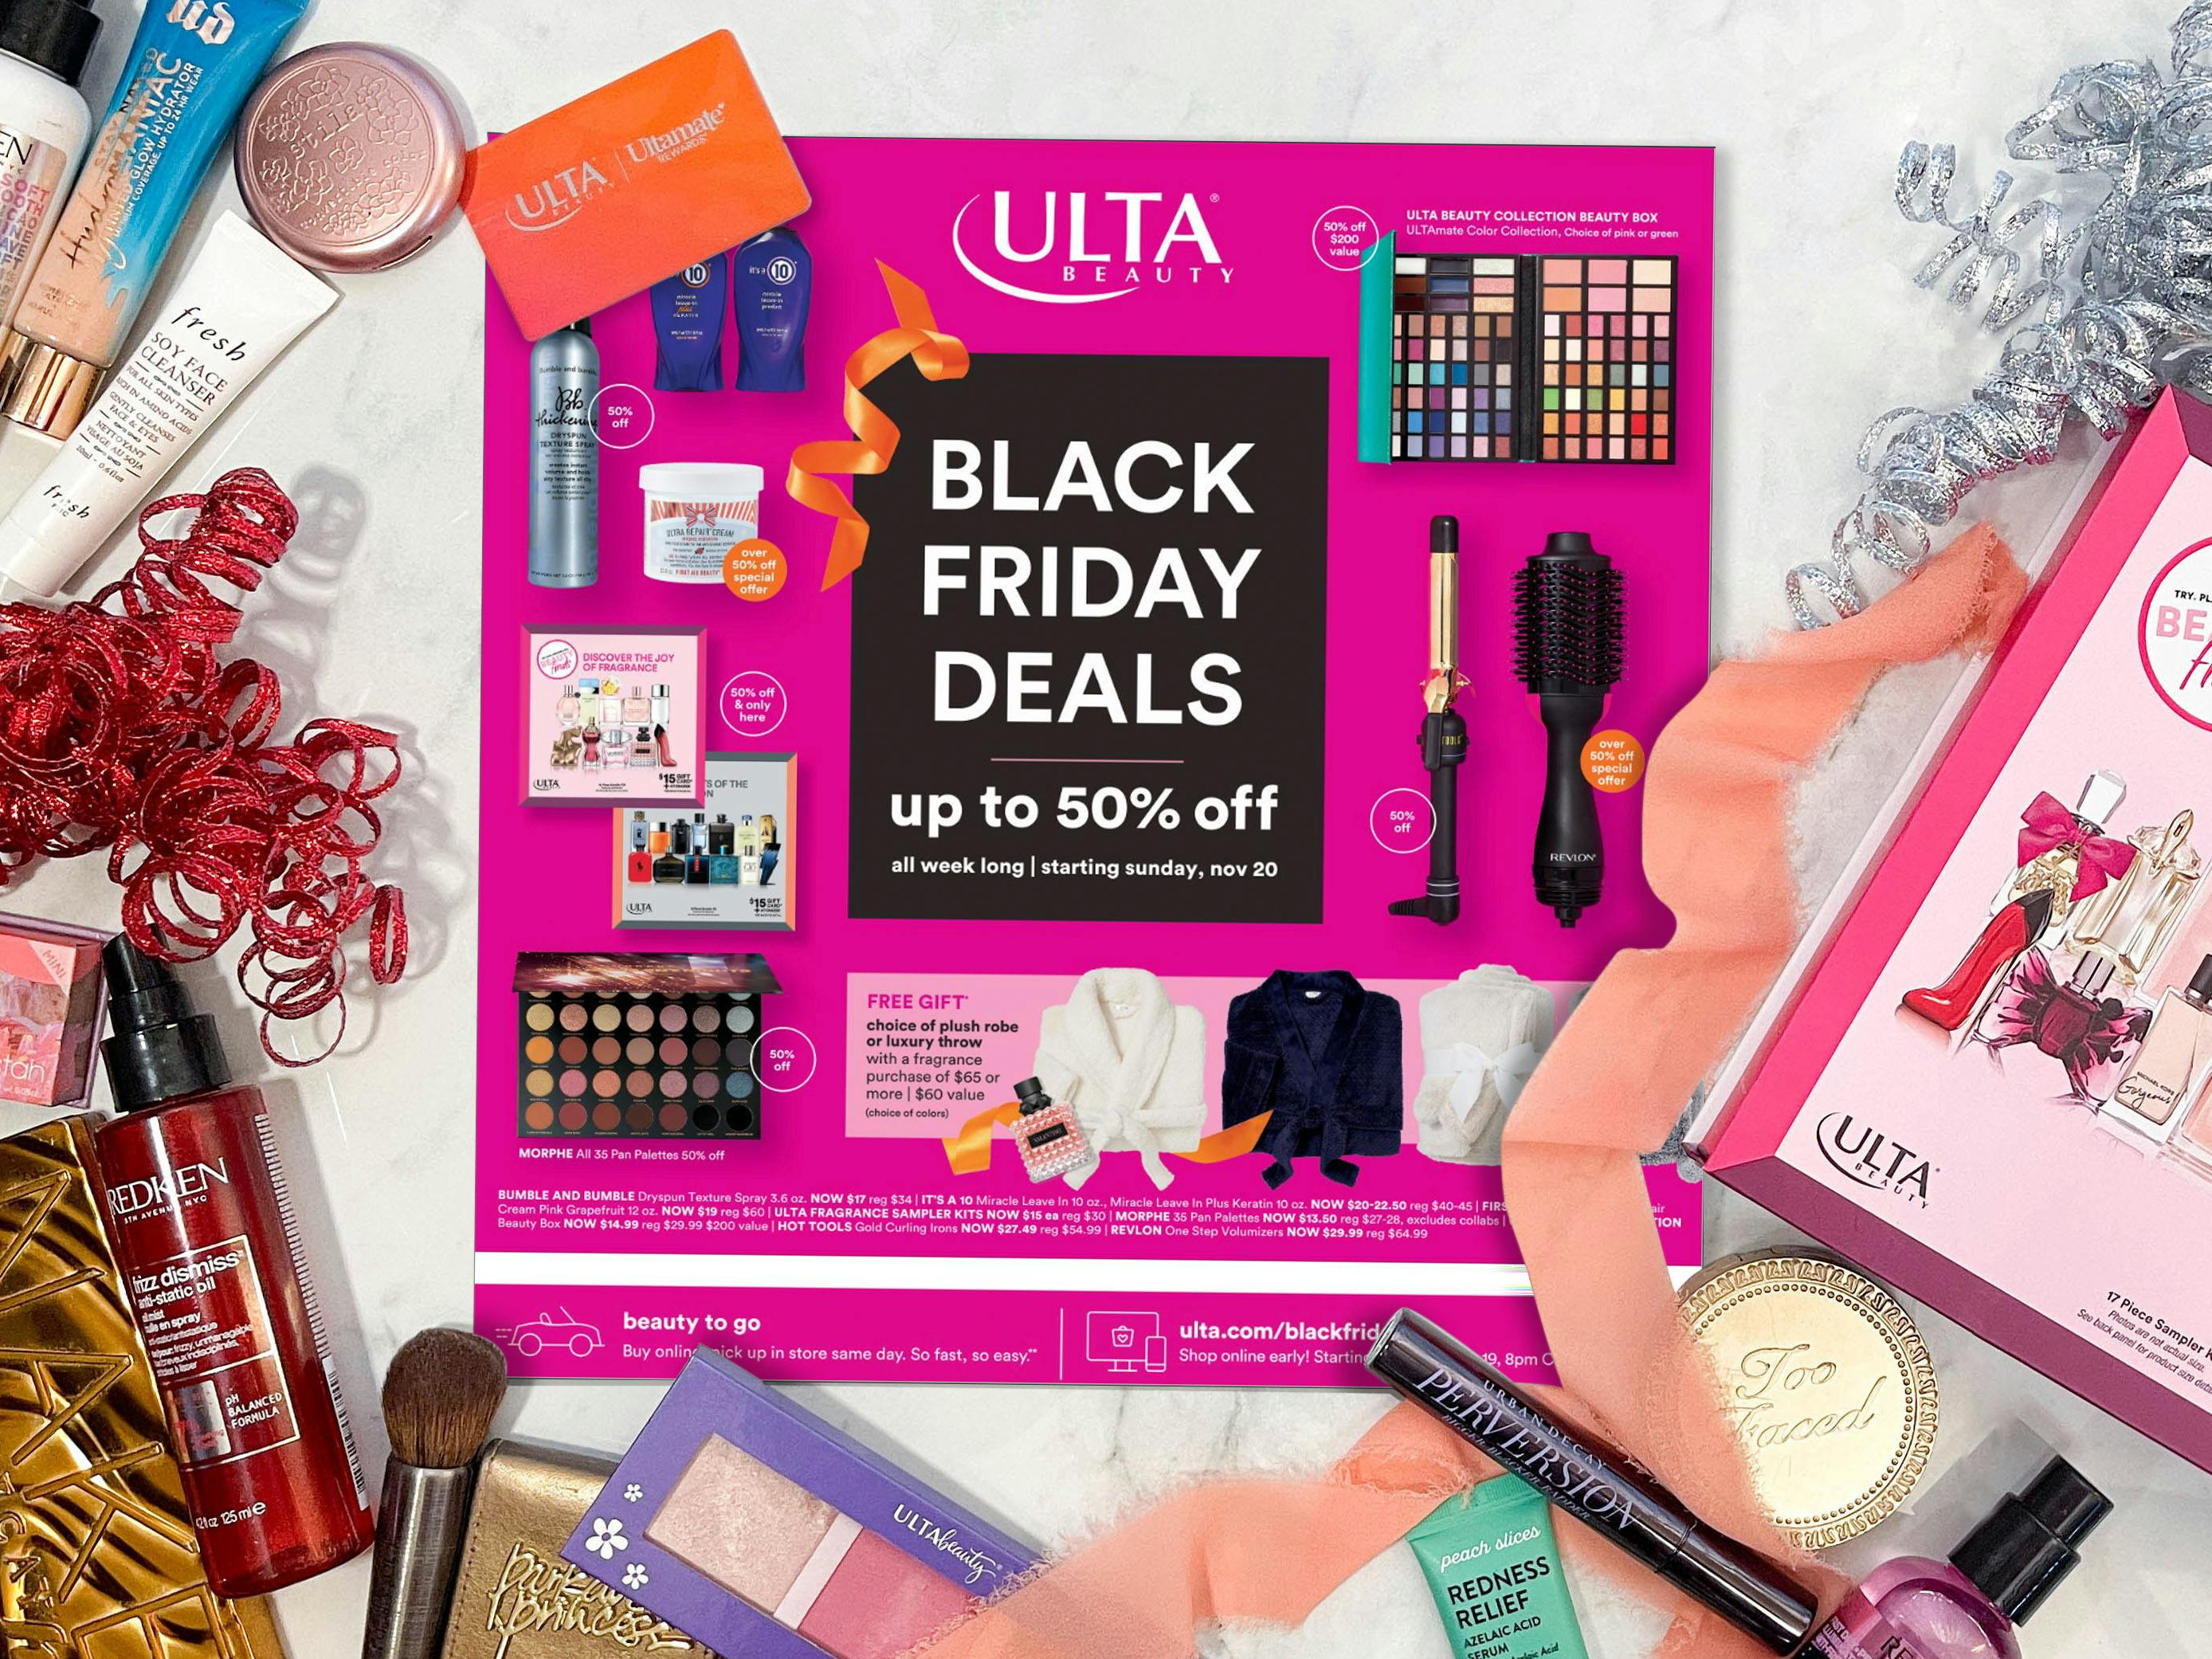 The Ulta Black Friday 2022 advertisement on a table with beauty products and ribbons